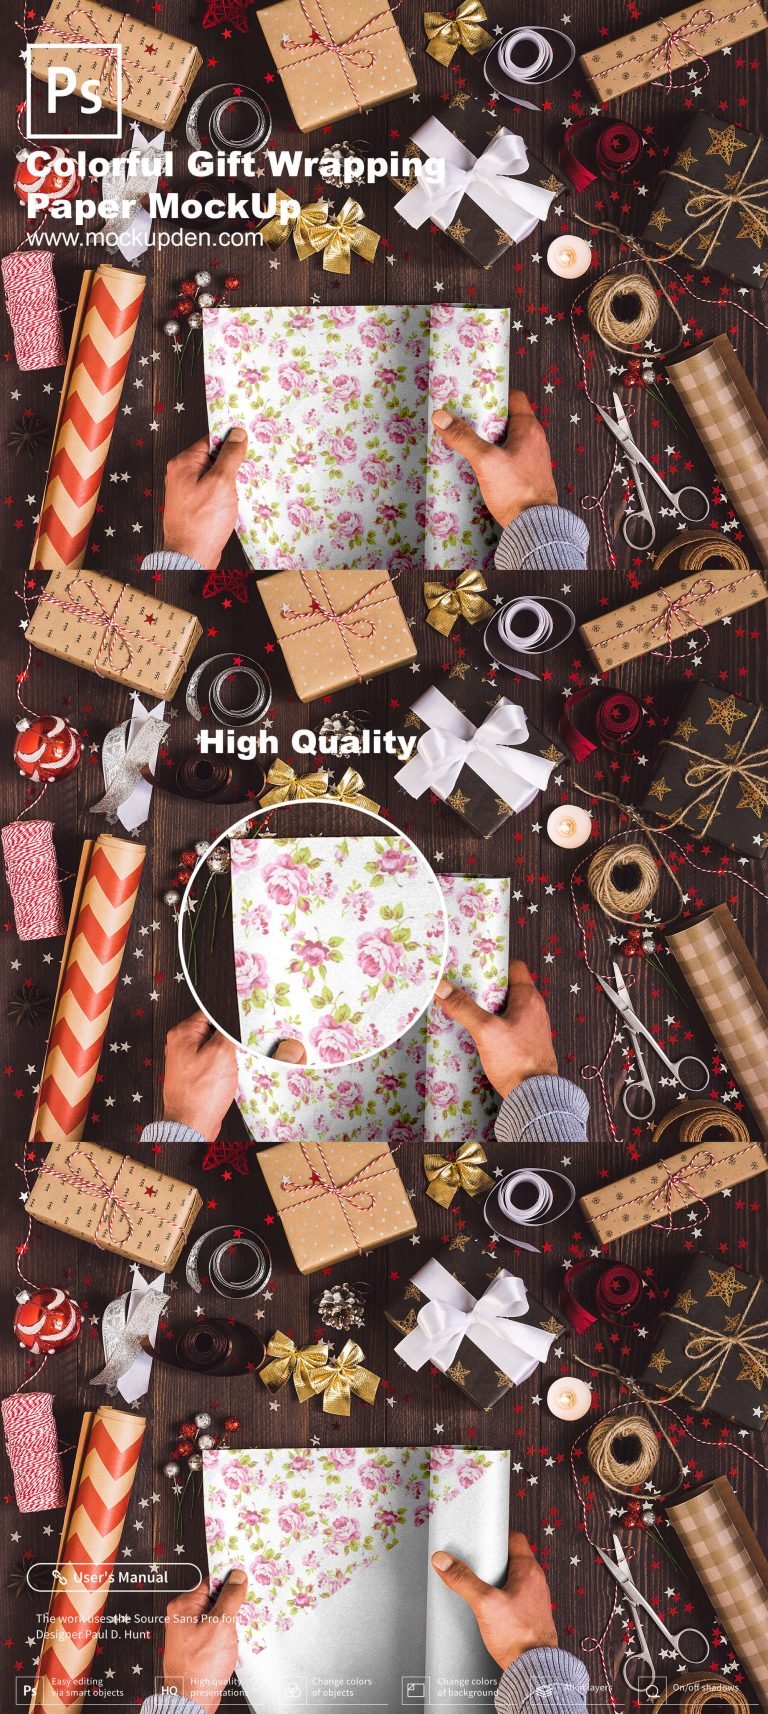 Download Gift Wrapping Paper Mockup |30+ Best PSD Gift Wrapping ...